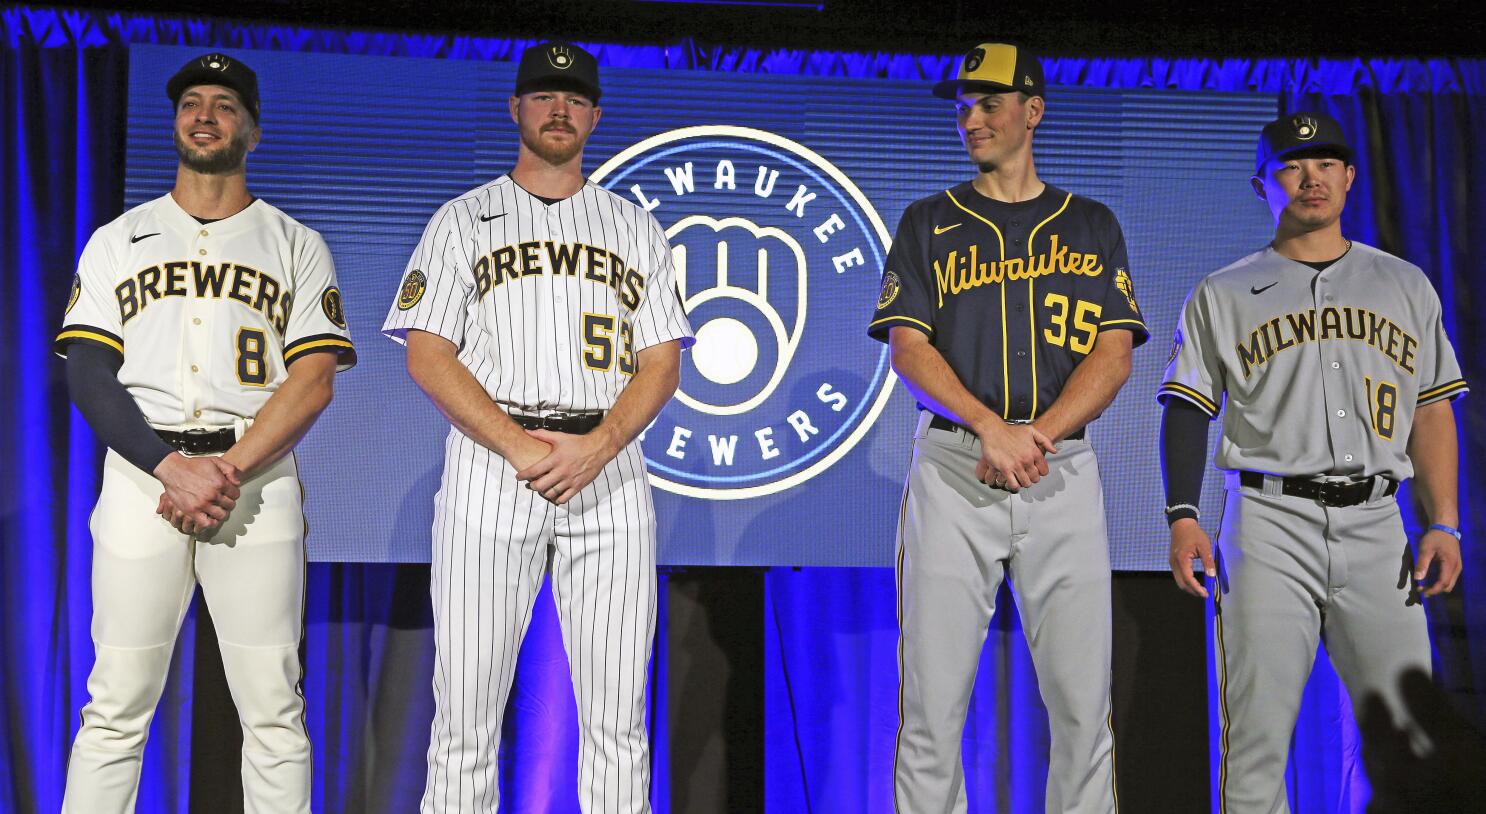 Milwaukee Brewers bringing back ball-in-glove logo in 2020 - The